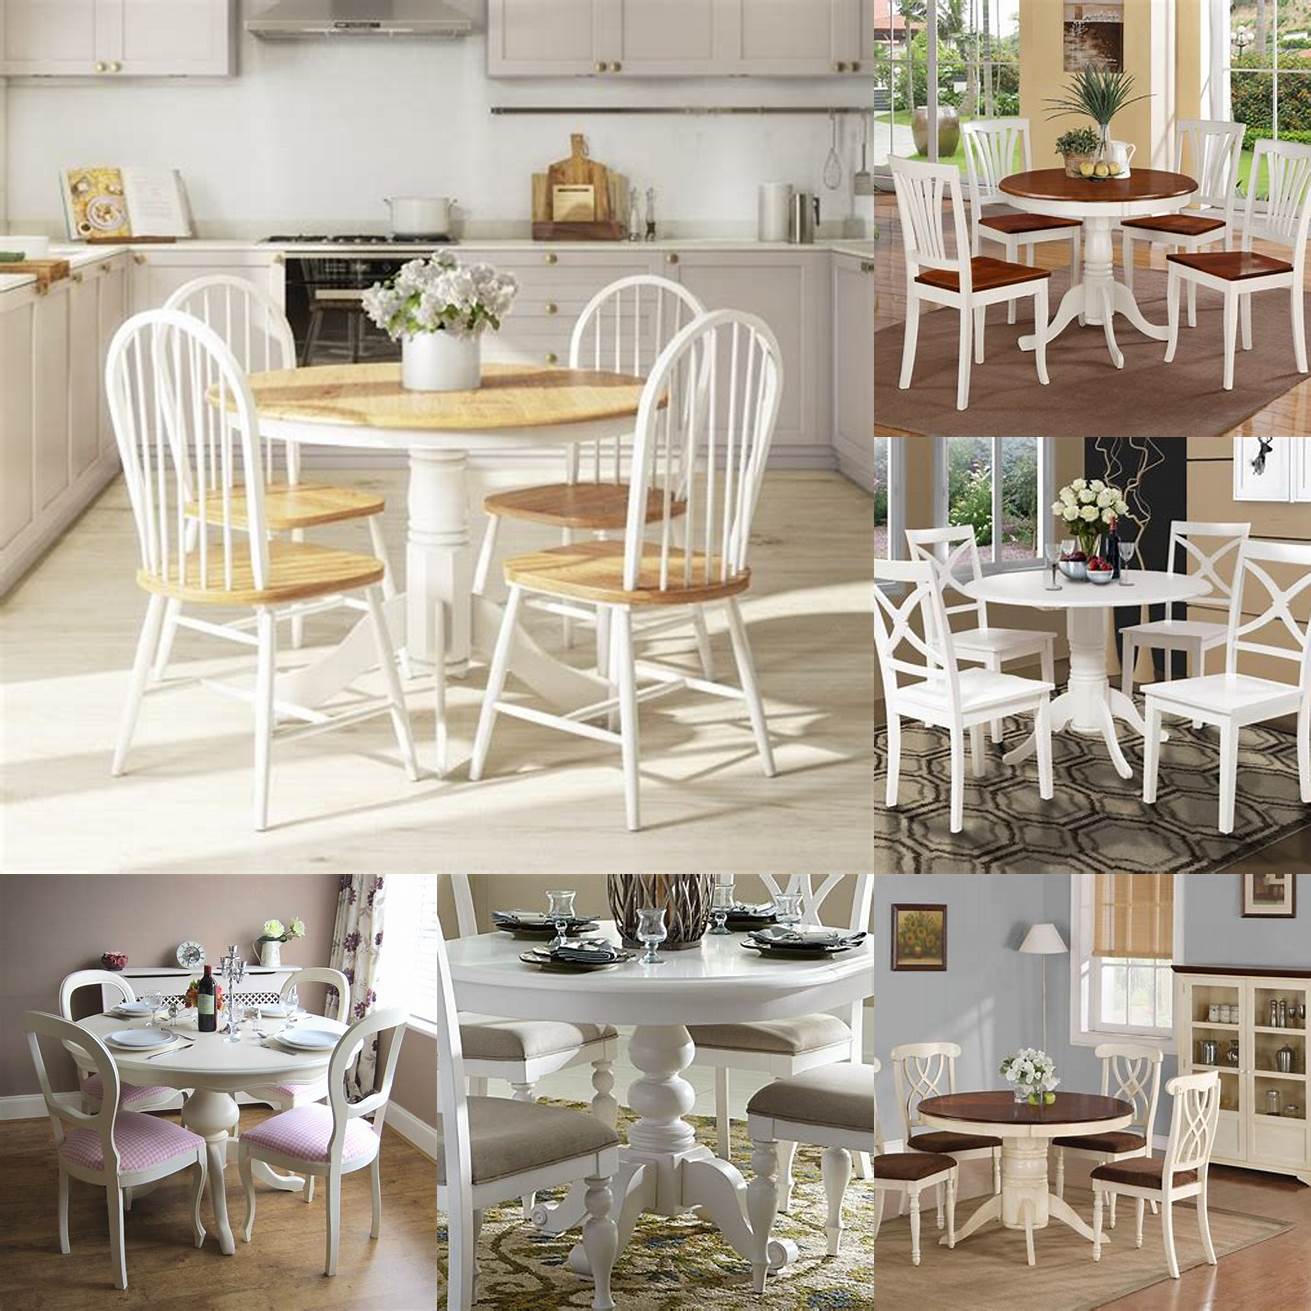 A white round kitchen table with four chairs that can fit in small spaces